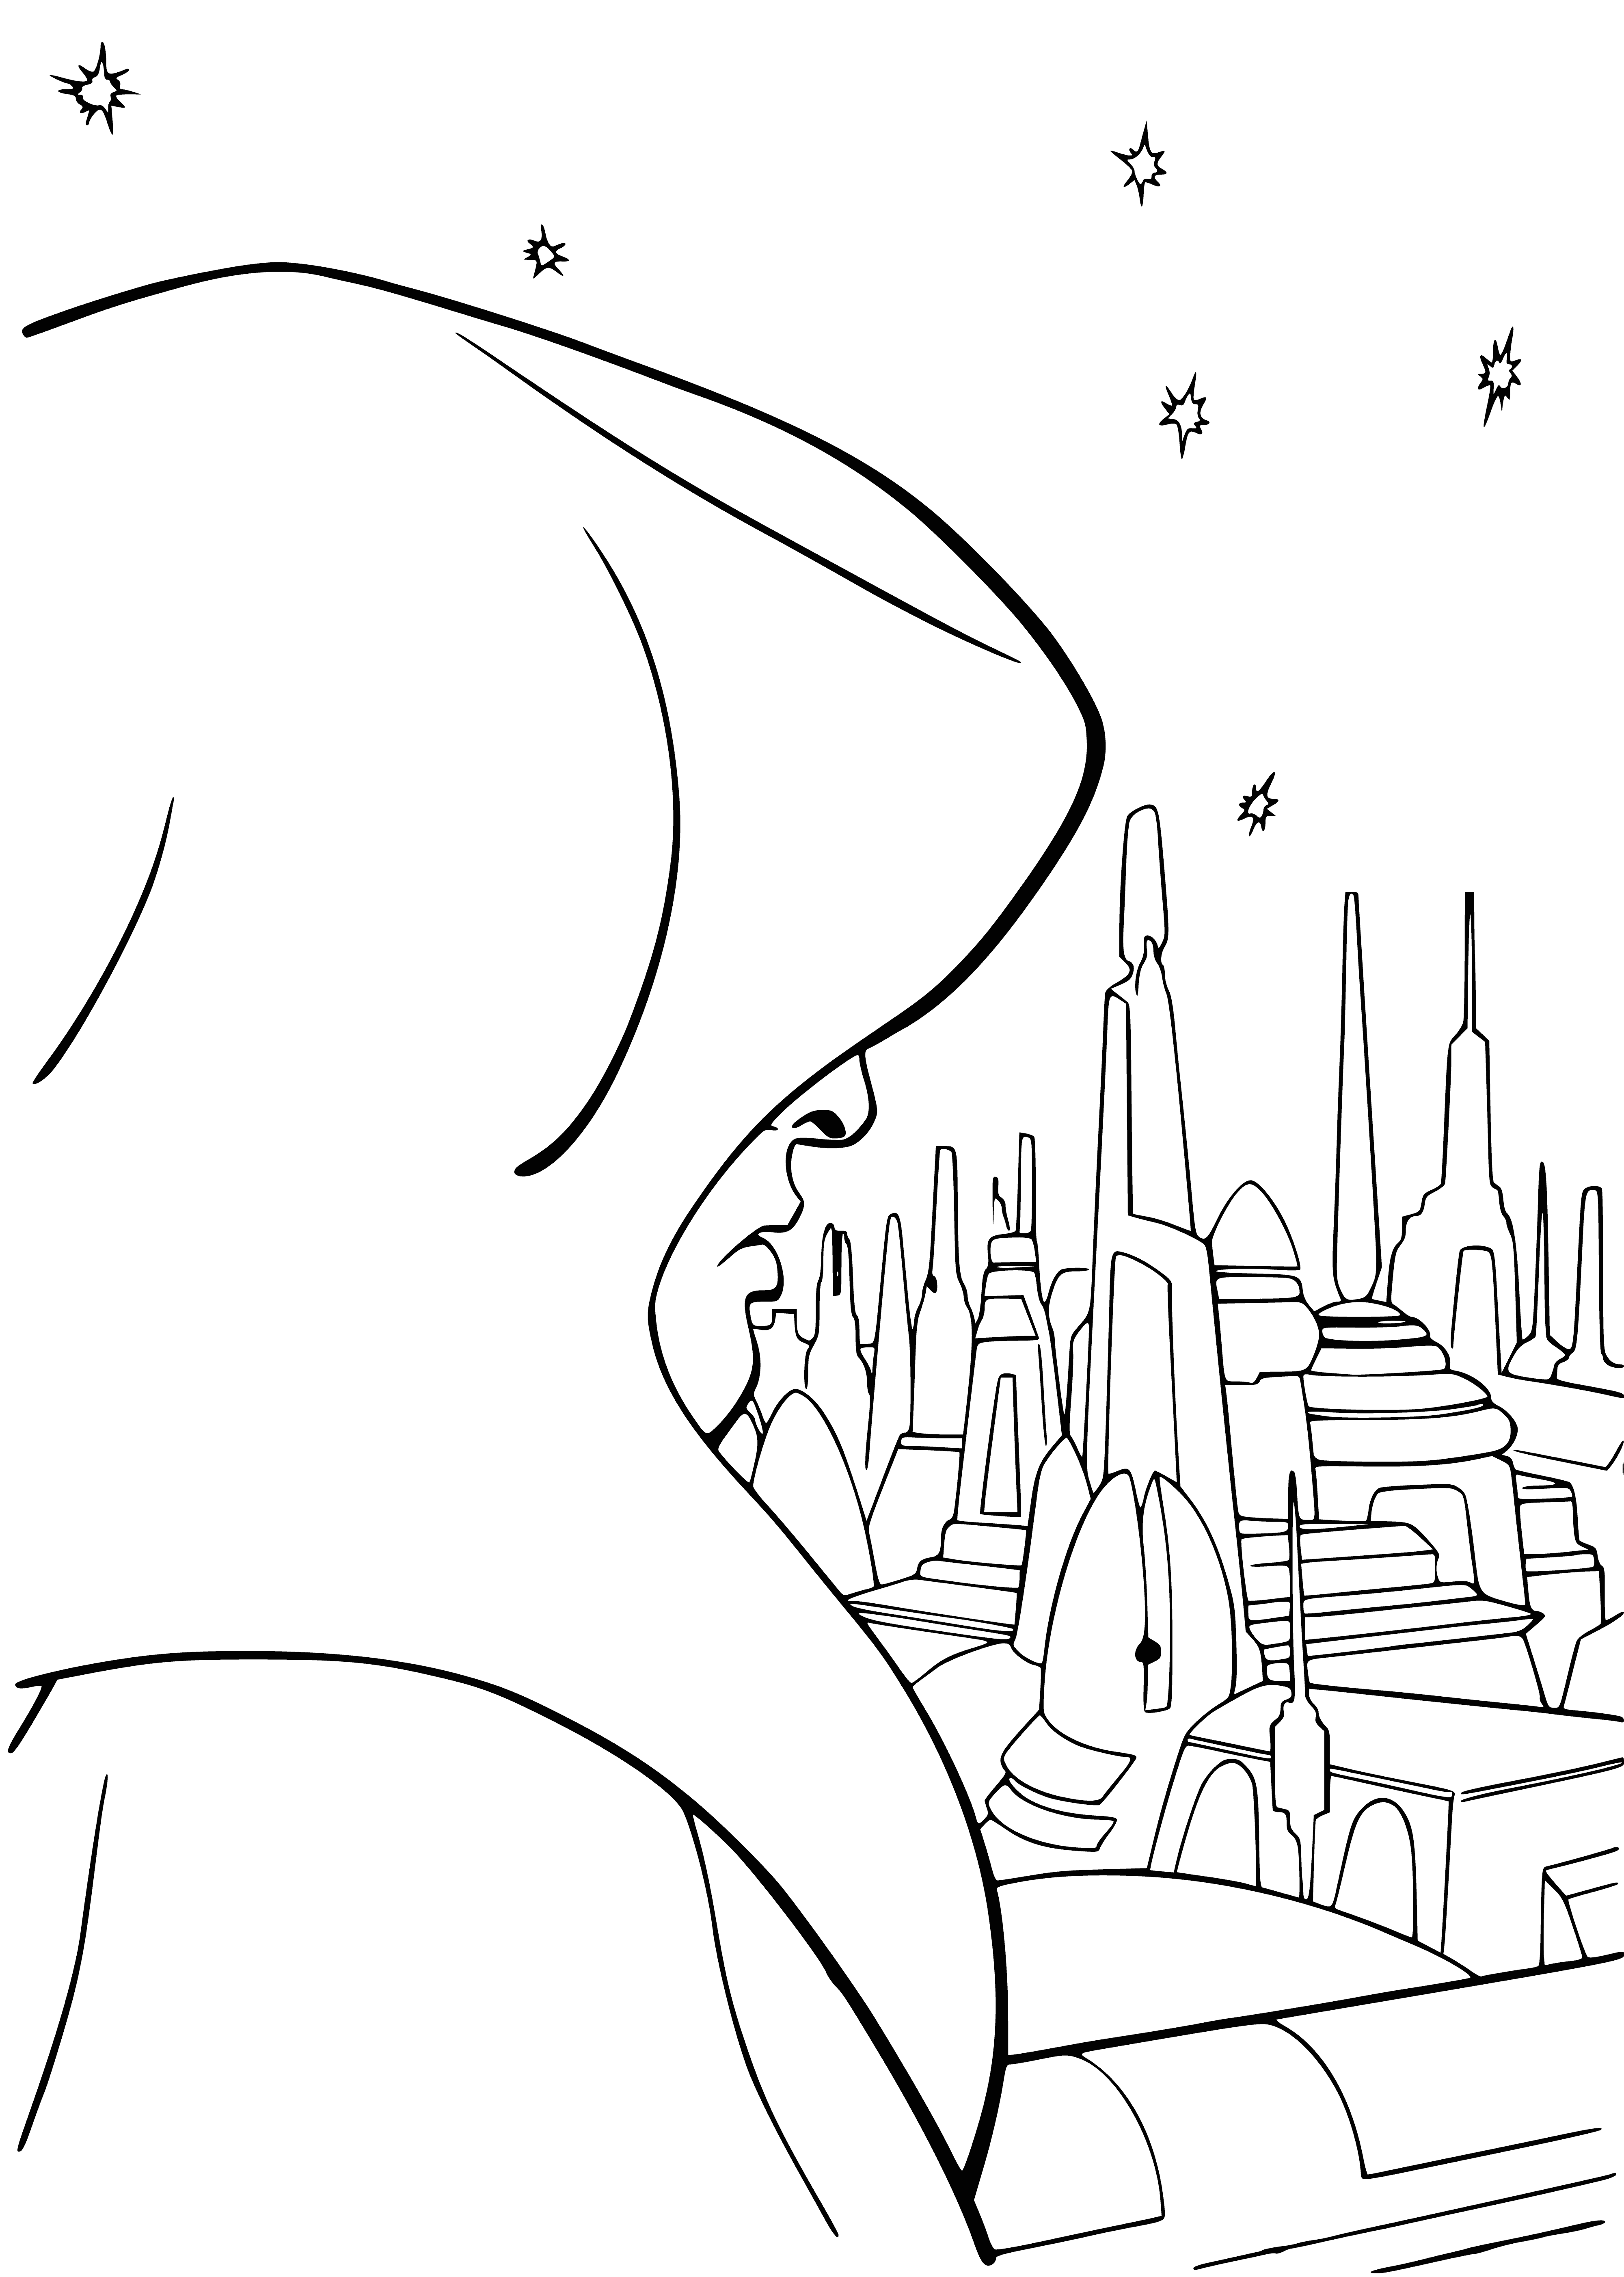 coloring page: A city view coloring page of tall buildings, people, and busy streets--episode III of Star Wars.